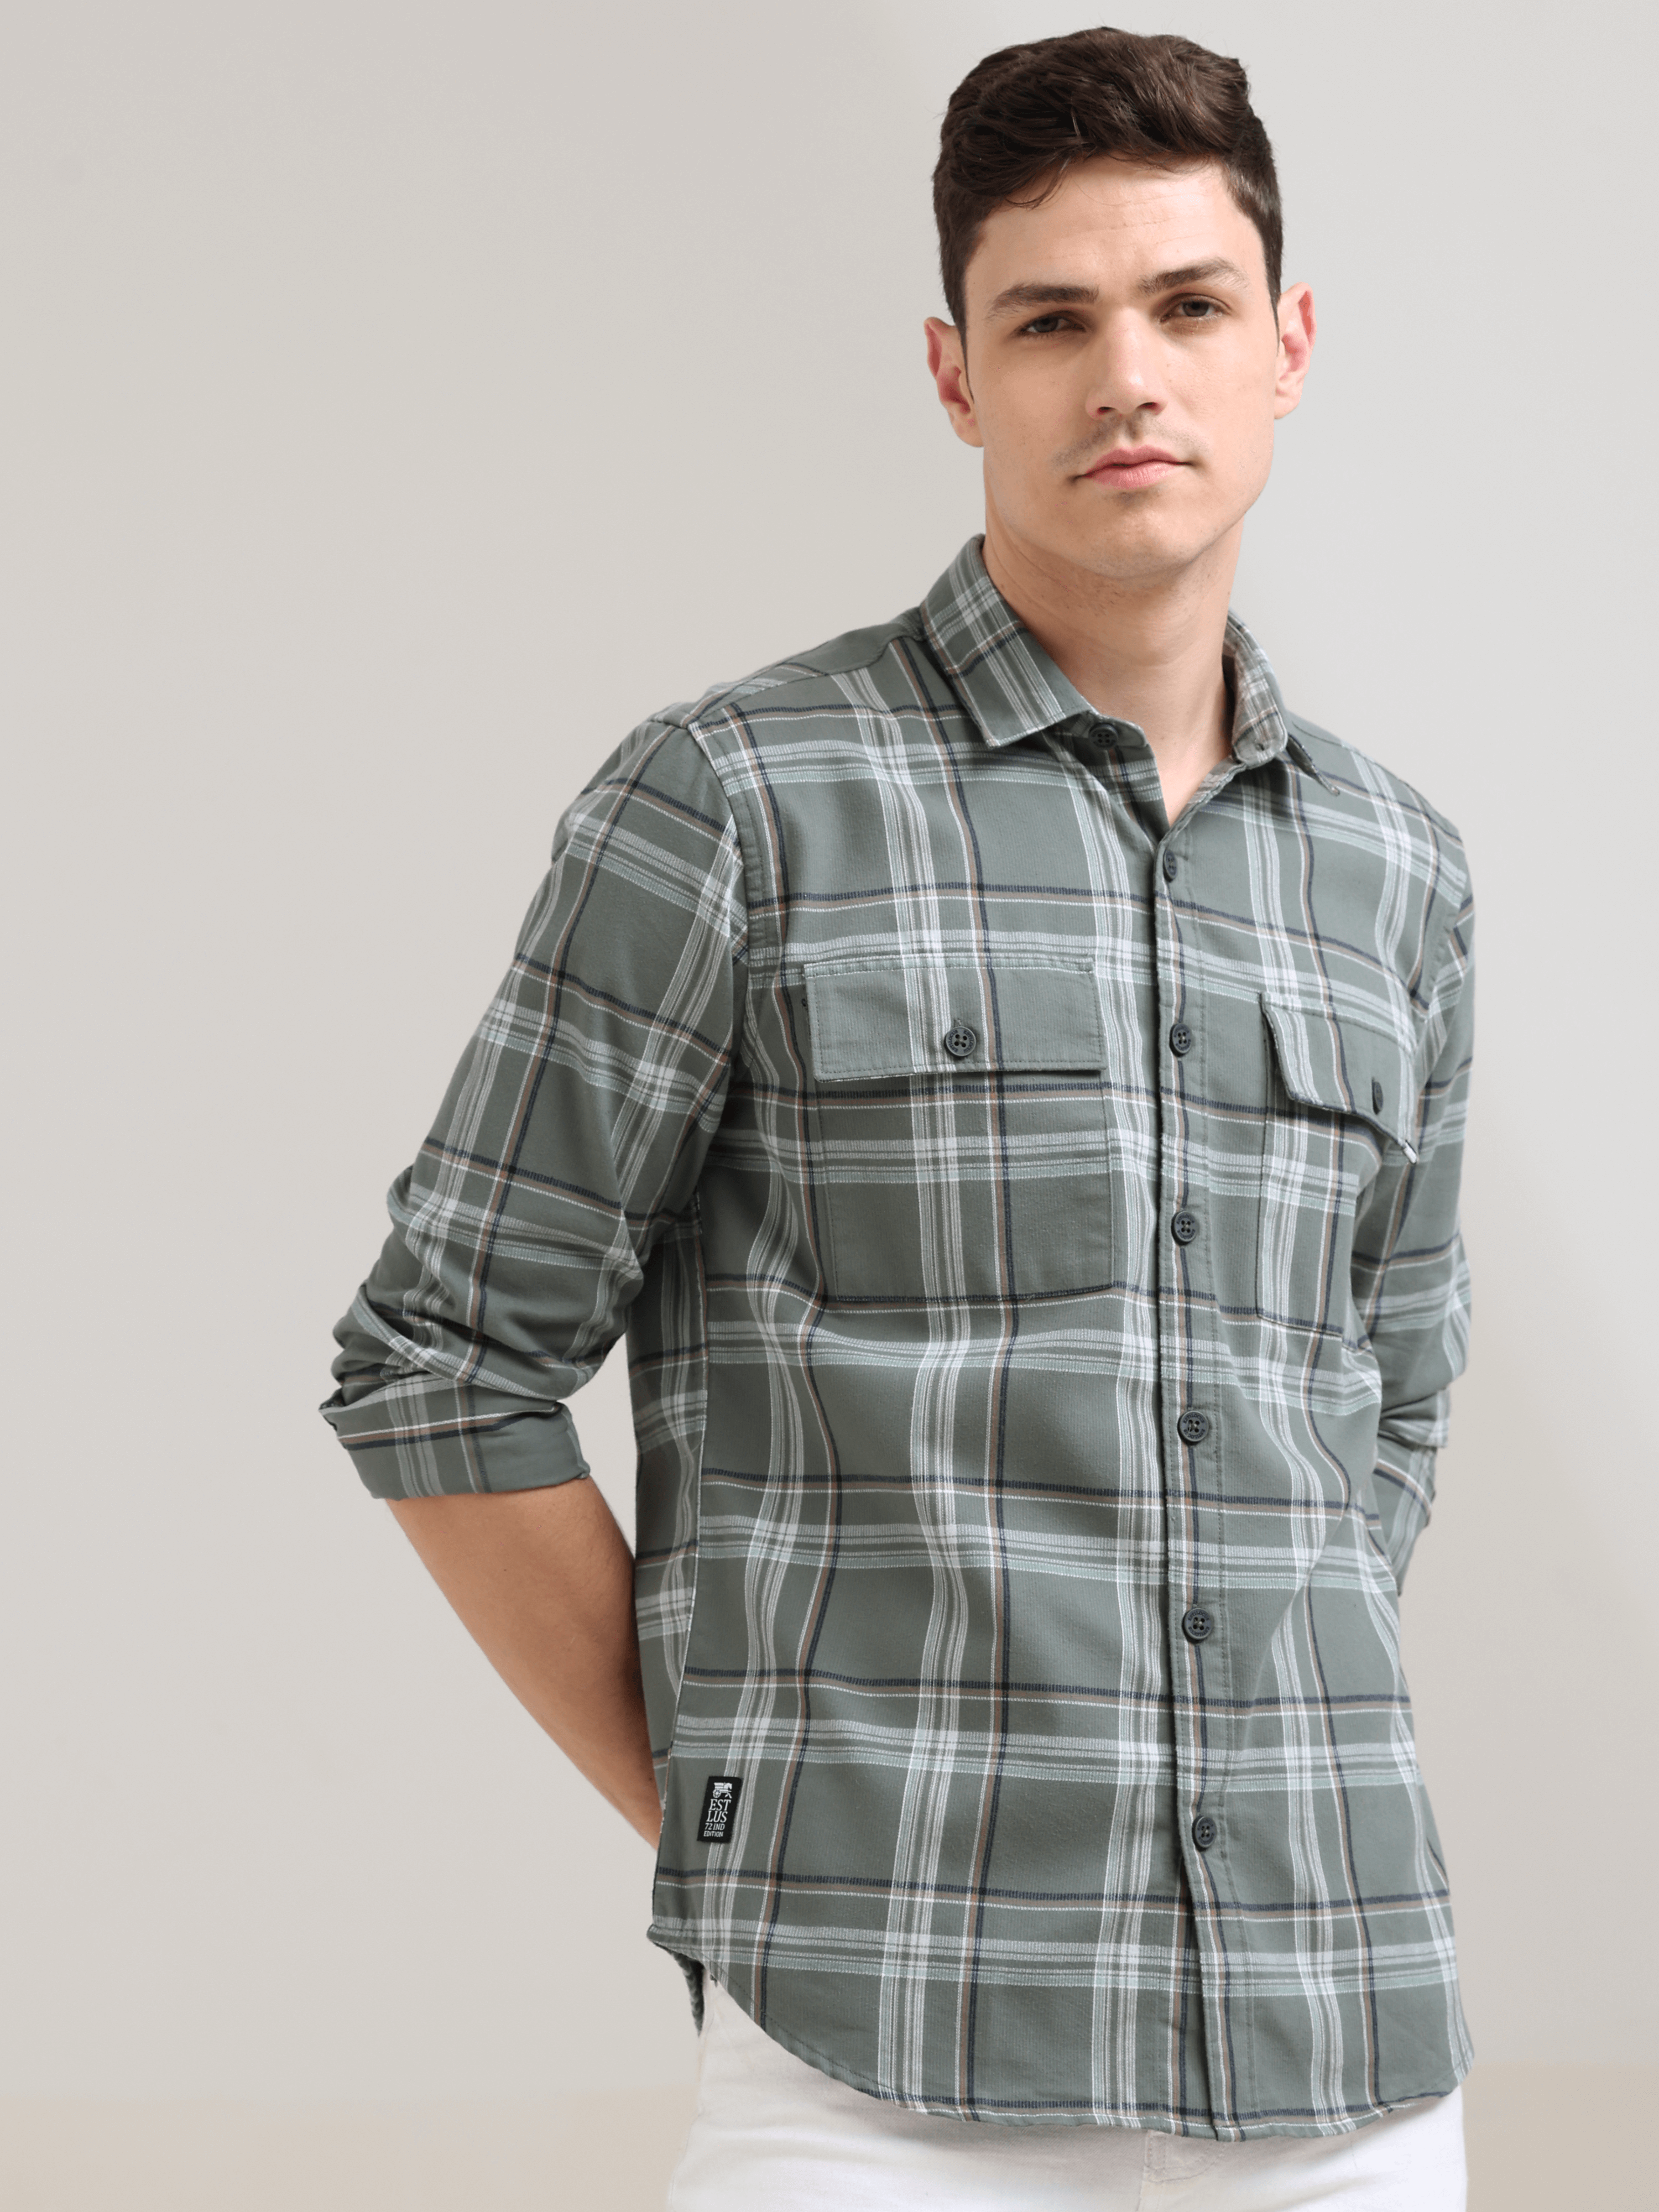 Taupe green off-white casual check shirt shop online at Estilocus. 100% Cotton • Full-sleeve check shirt• Cut and sew placket• Regular collar• Double button edge cuff• Double pocket with flap• Curved bottom hemline .• All double needle construction, fines